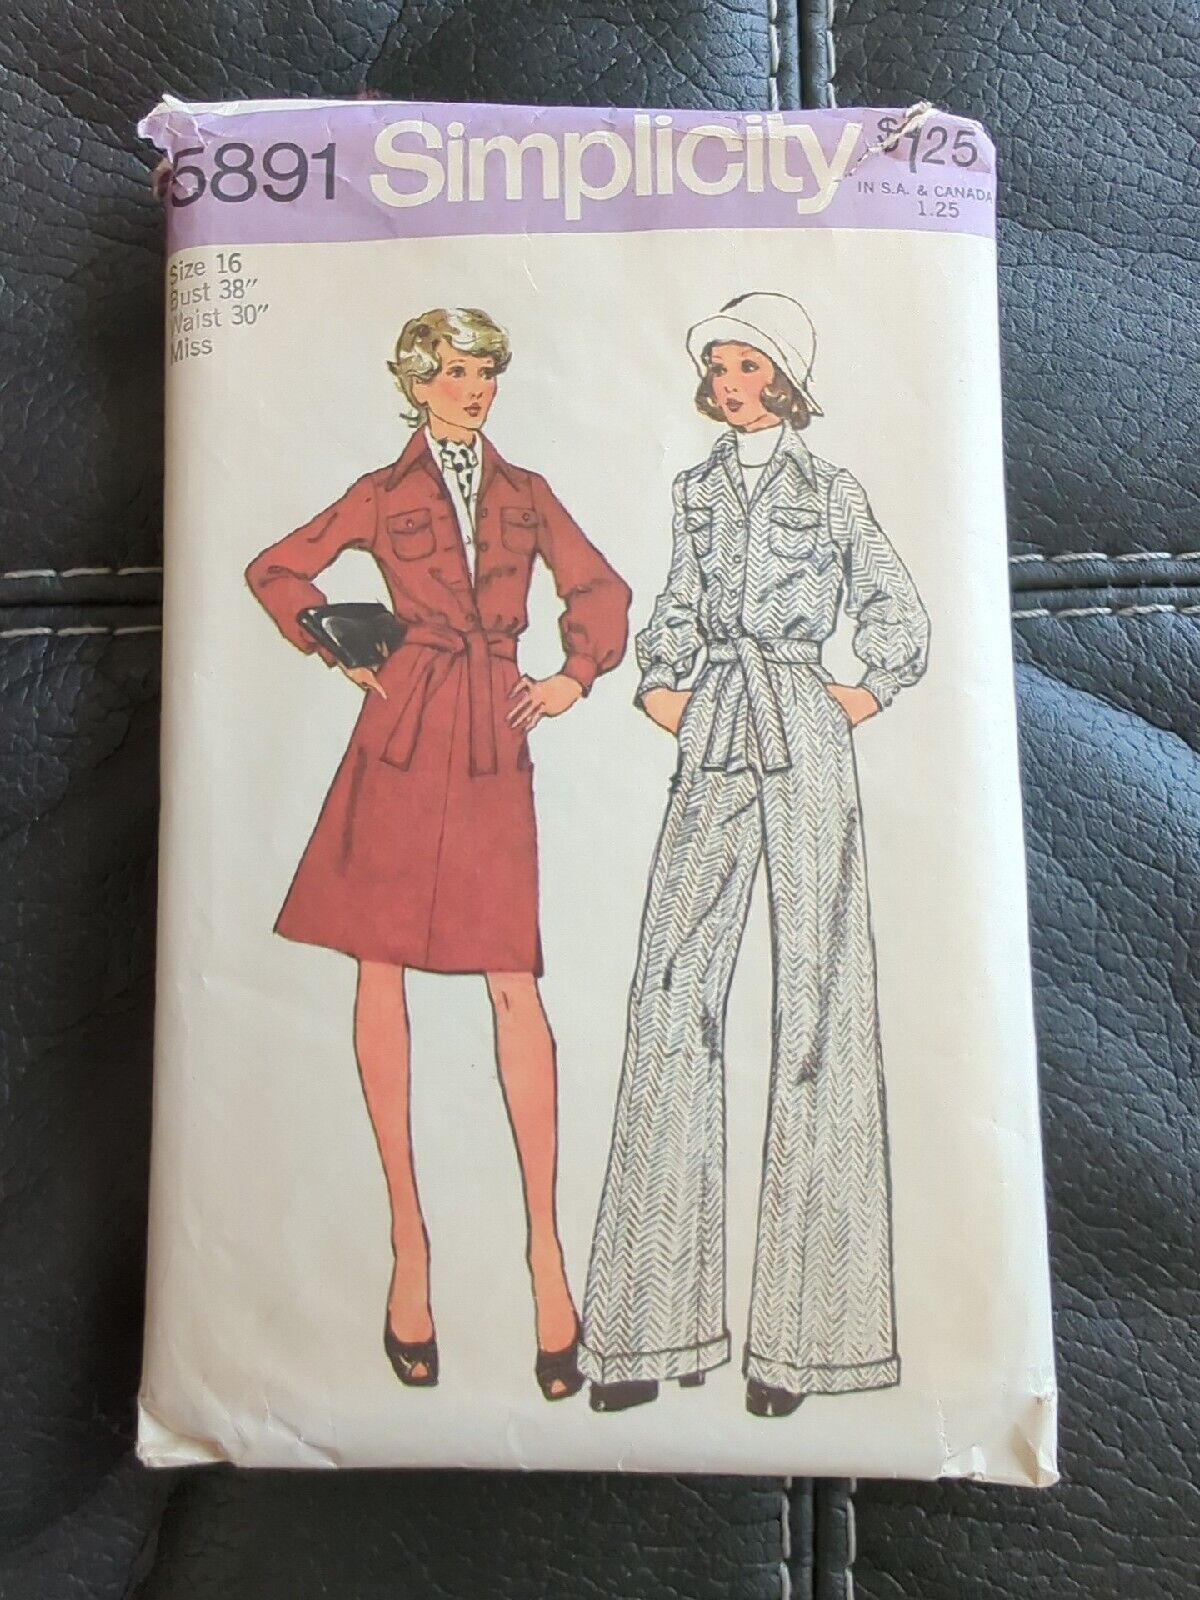 Vintage 1970s Simplicity 5891 Sewing Pattern Size 16 Jacket Skirt And Pant